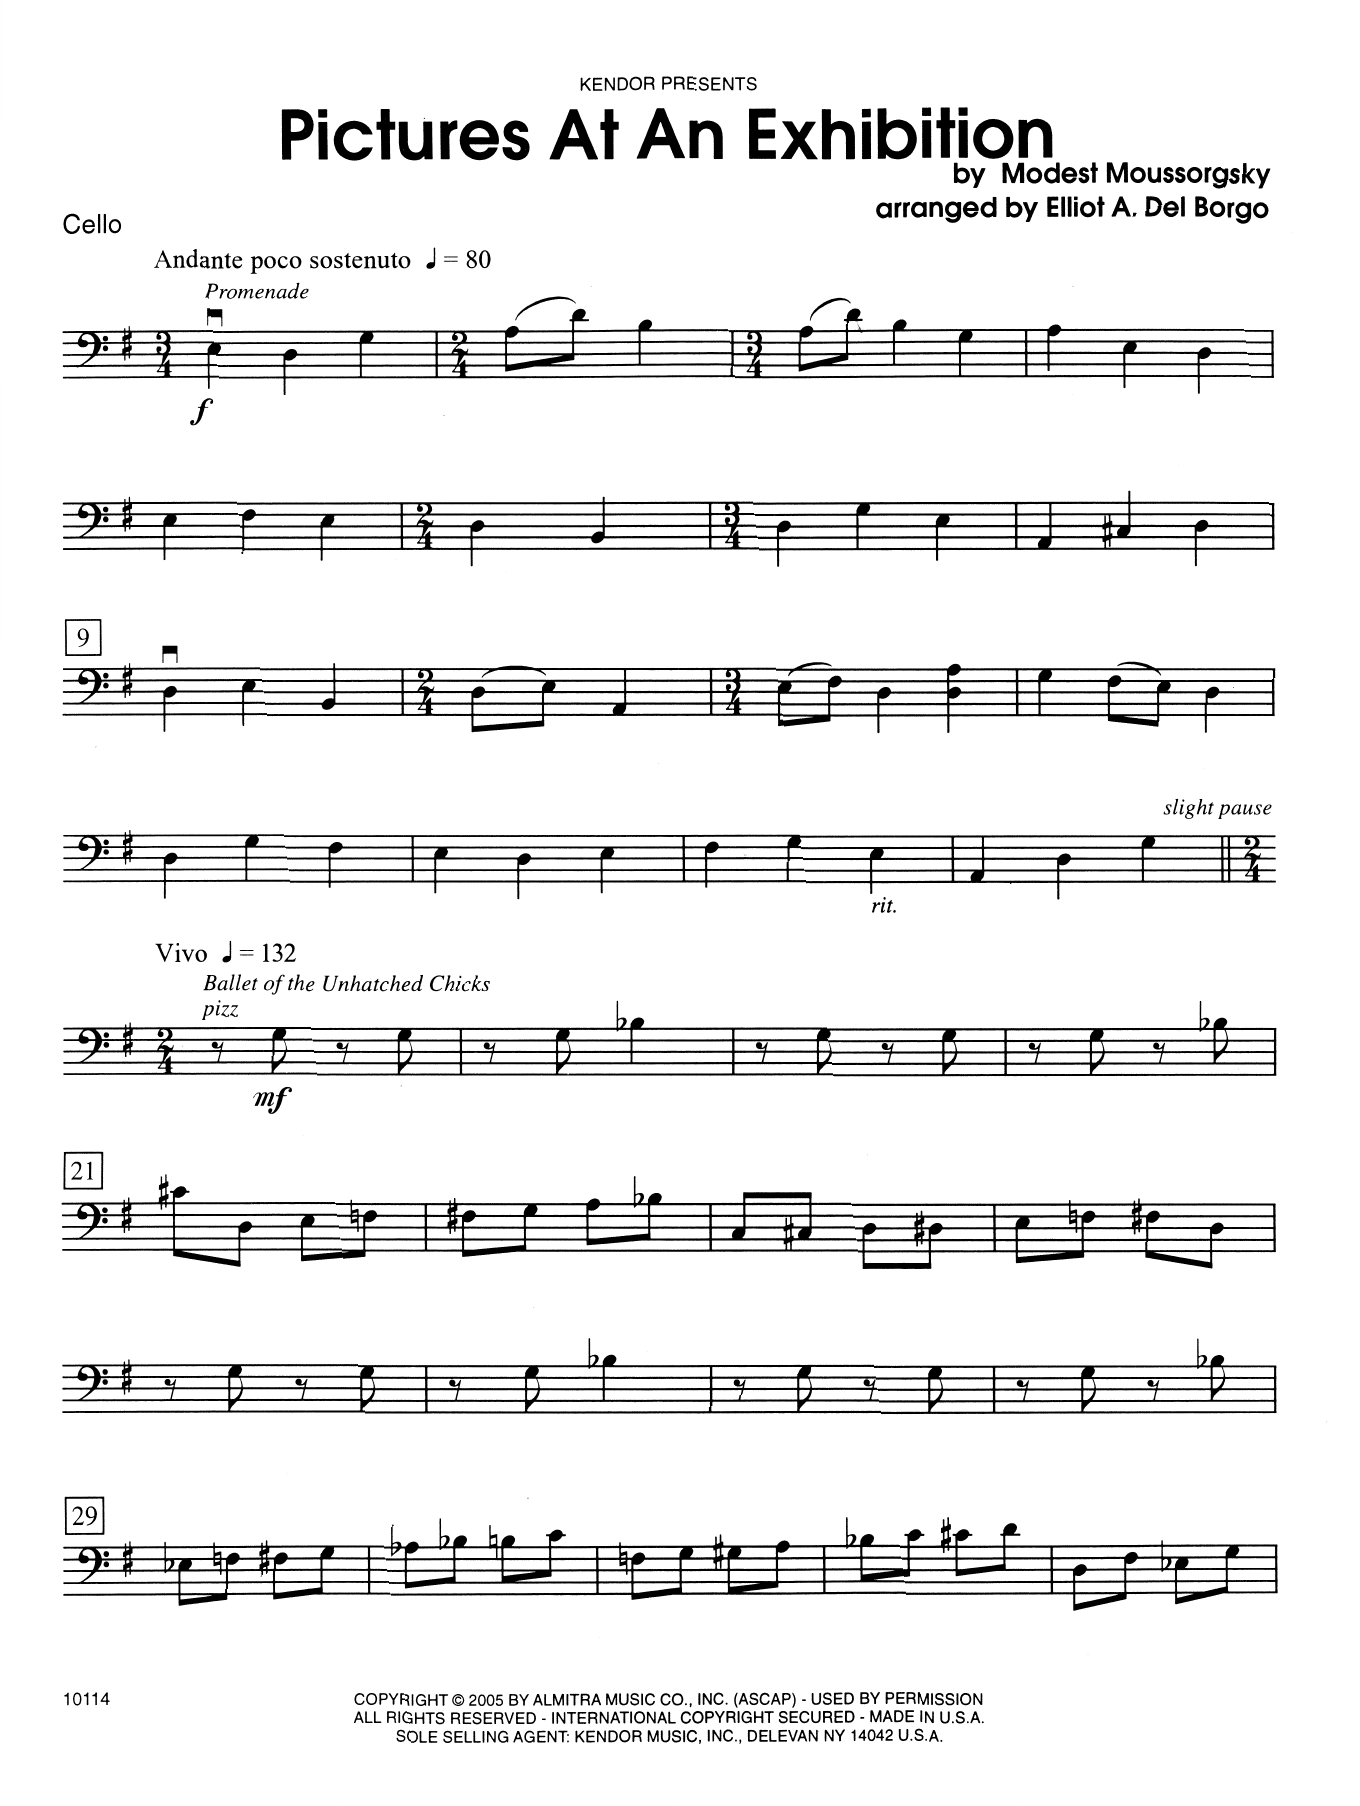 Download Modest Mussorgsky Pictures at an Exhibition - Cello Sheet Music